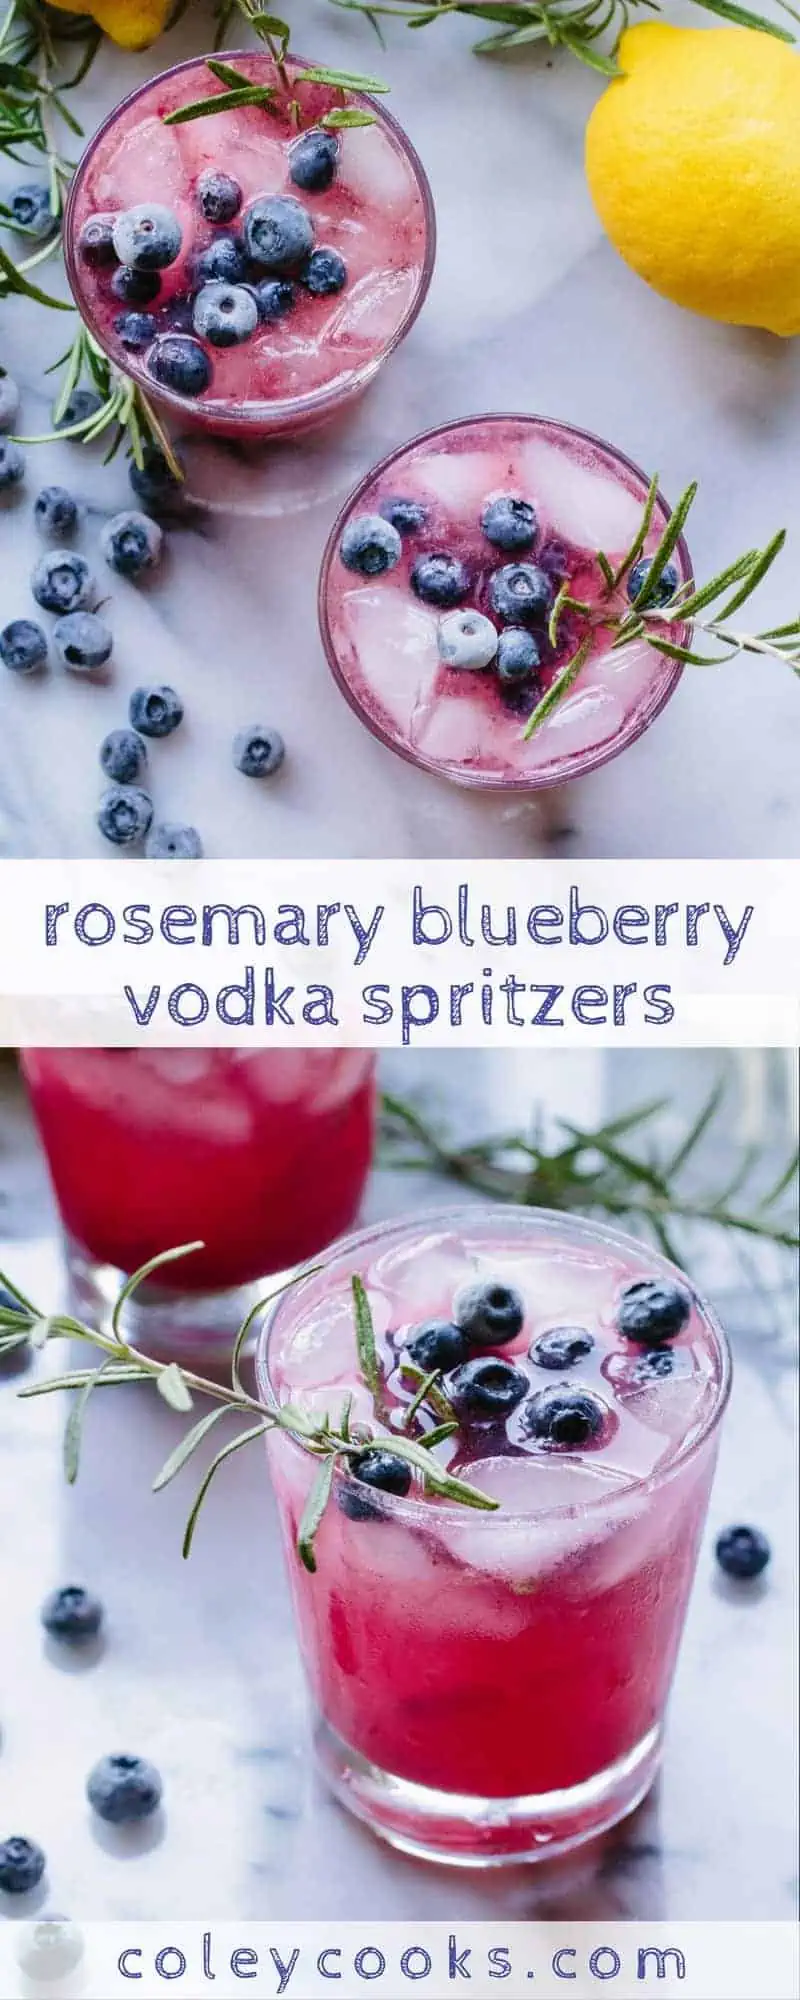 ROSEMARY BLUEBERRY VODKA SPRITZERS | Easy light and refreshing vodka cocktails! This boozy beverage is bubbly, tangy, and not too sweet! Perfect for summer sipping! | ColeyCooks.com